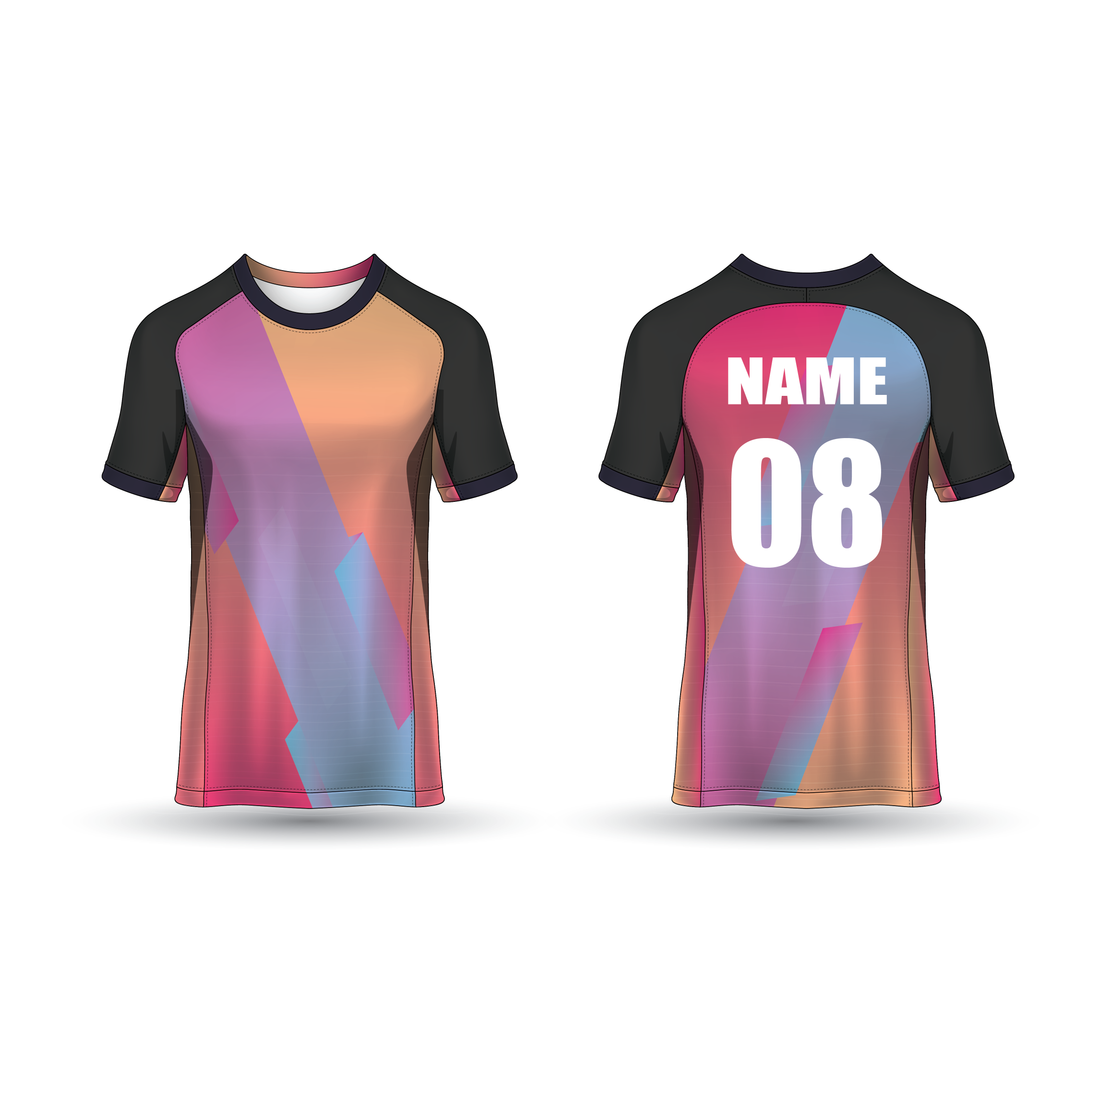 NEXT PRINT All Over Printed Customized Sublimation T-Shirt Unisex Sports Jersey Player Name & Number, Team Name NP50000258